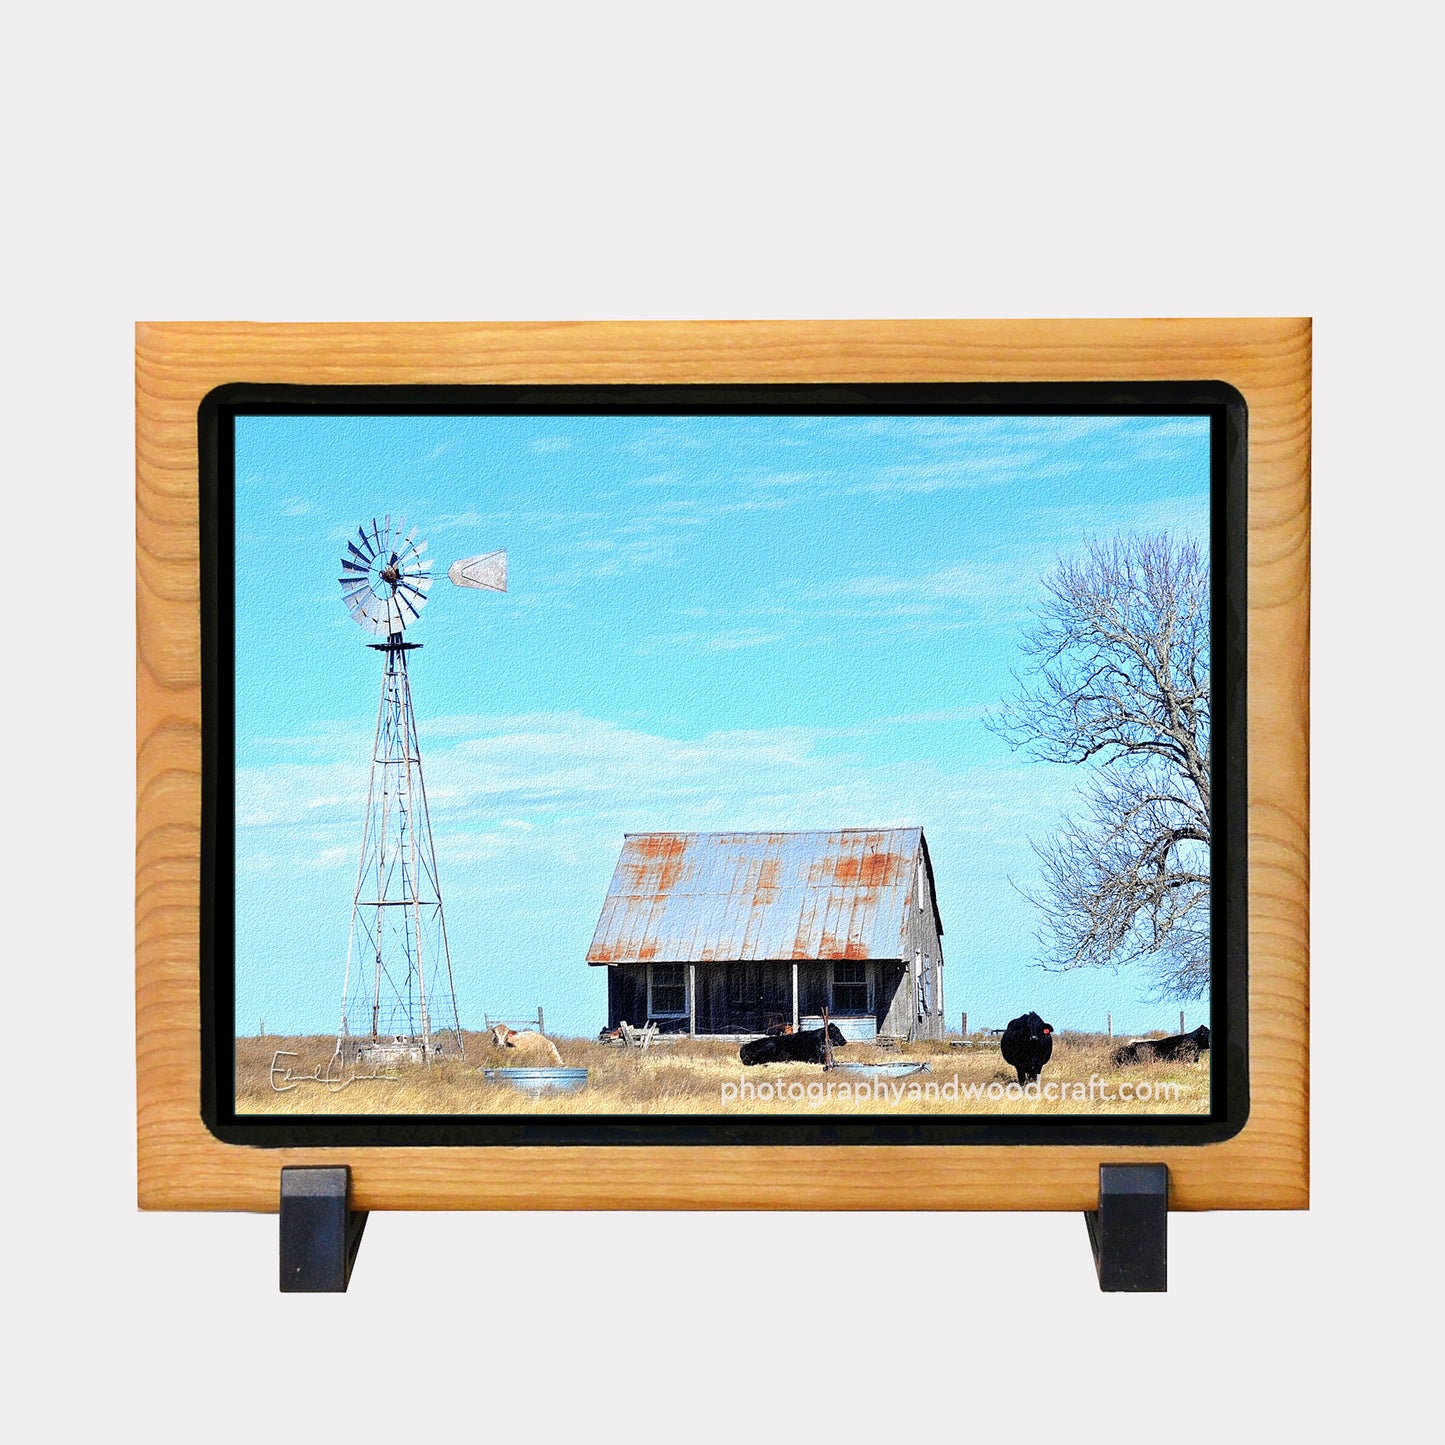 5" x 7" Homestead. Canvas Print in Solid Wood Floating Frame